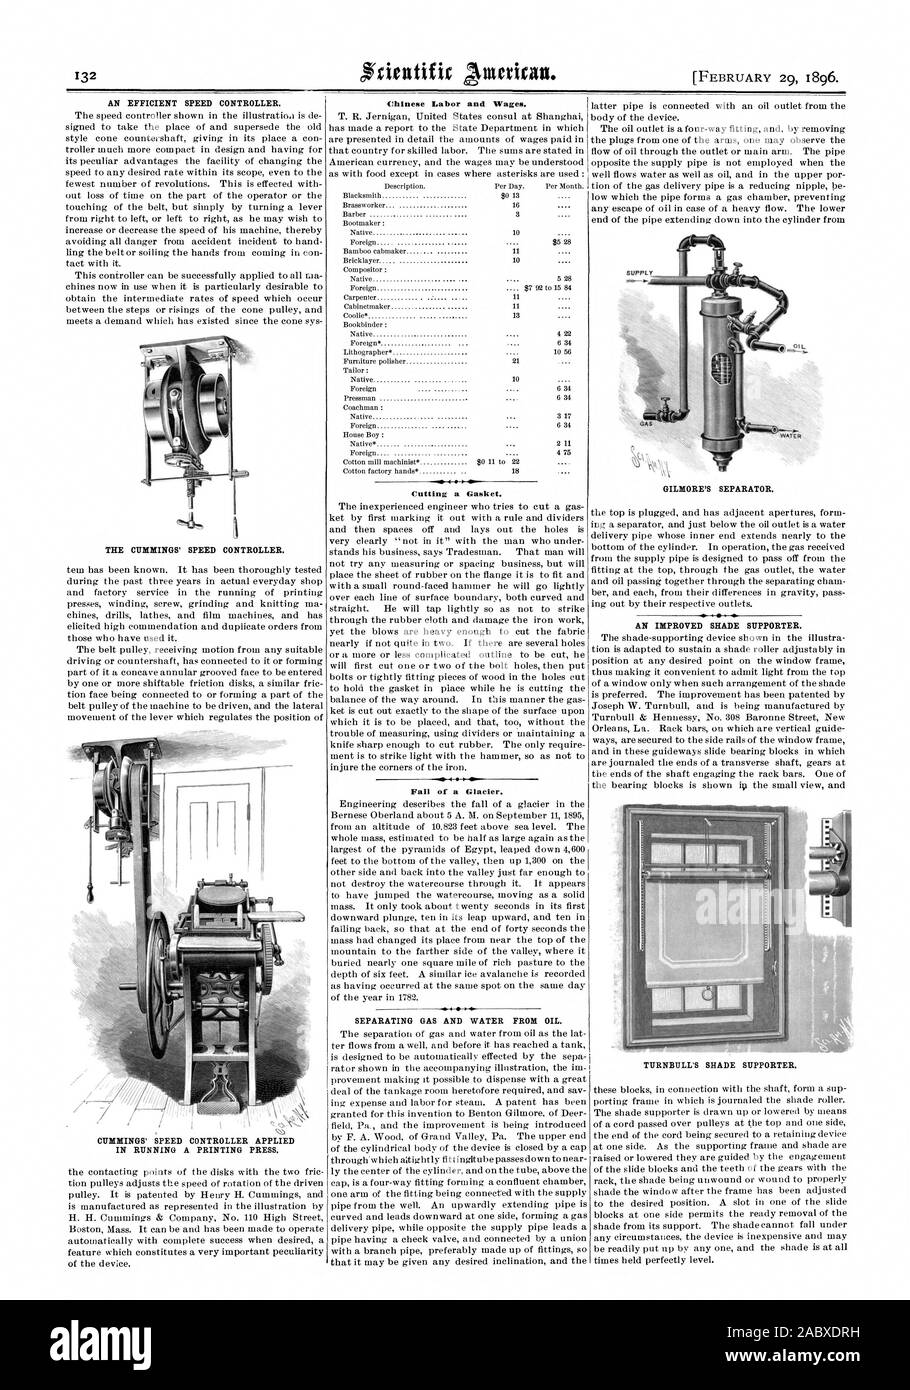 AN EFFICIENT SPEED CONTROLLER. THE CUMMINGS' SPEED CONTROLLER. Chinese Labor and Wages. Cutting a Gasket. Fall of a Glacier. SEPARATING GAS AND WATER FROM OIL. AN IMPROVED SHADE SUPPORTER., scientific american, 1896-02-29 Stock Photo